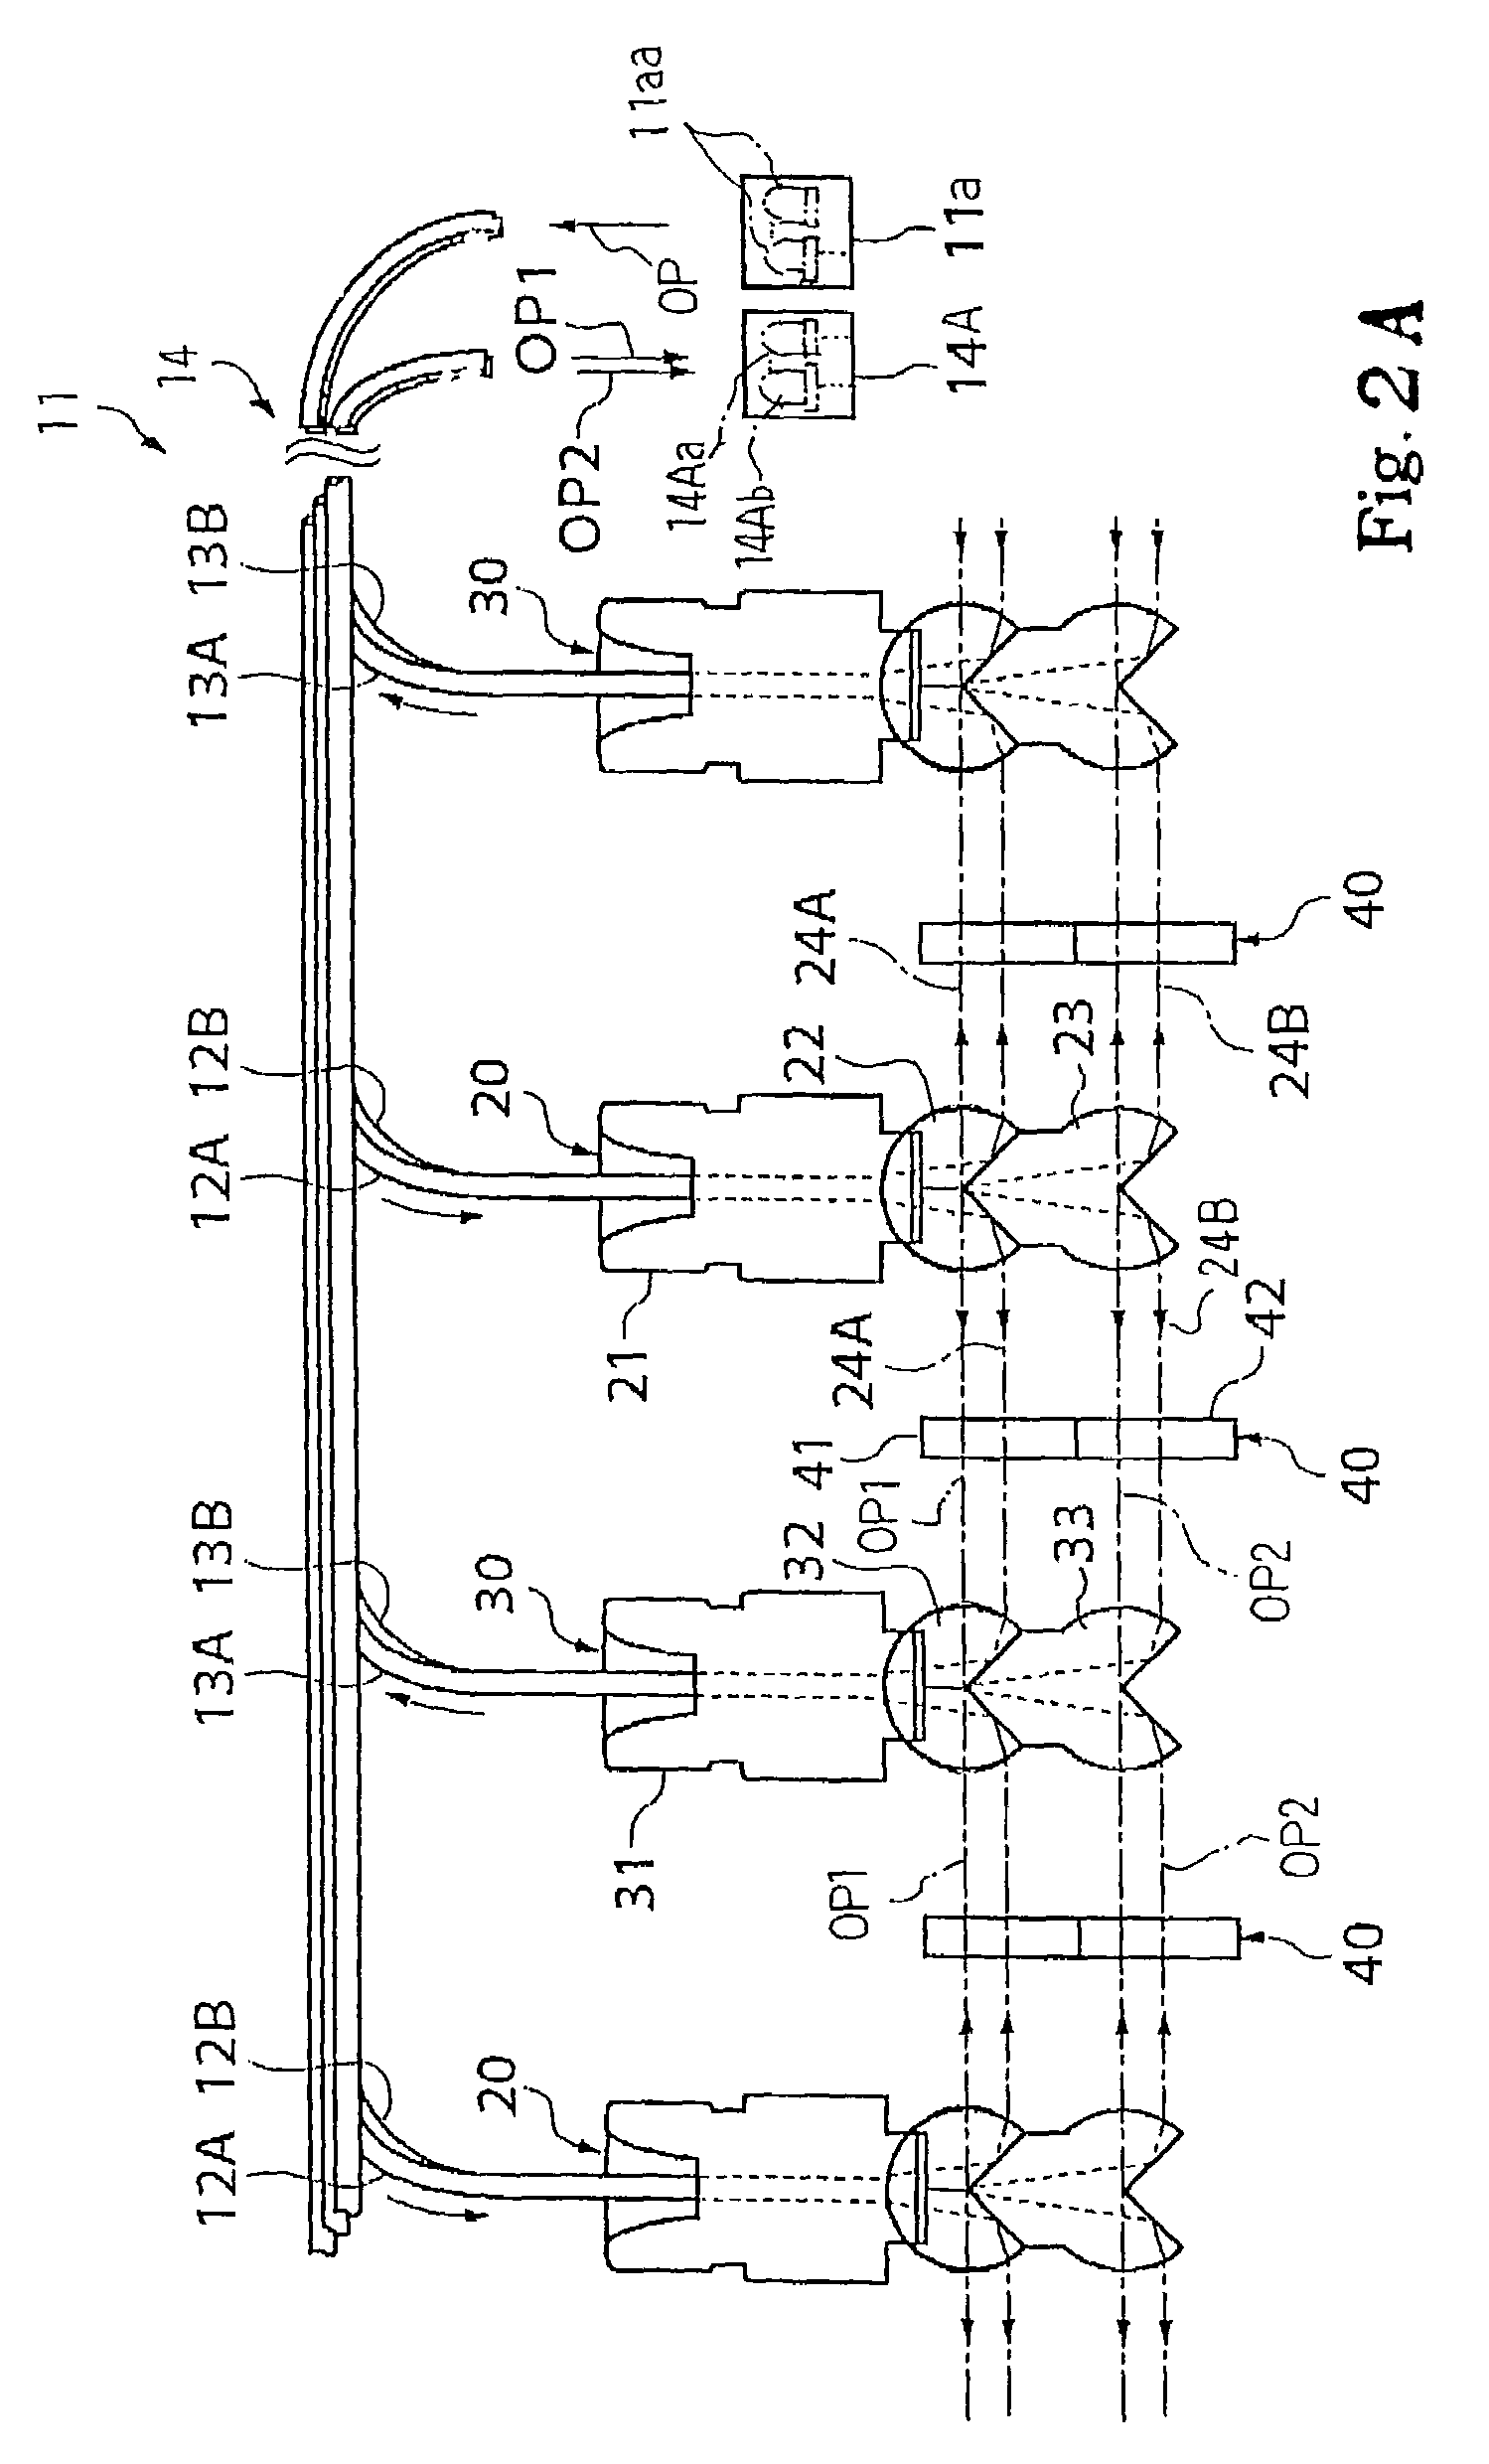 Self-calibrating transducer system and musical instrument equipped with the same